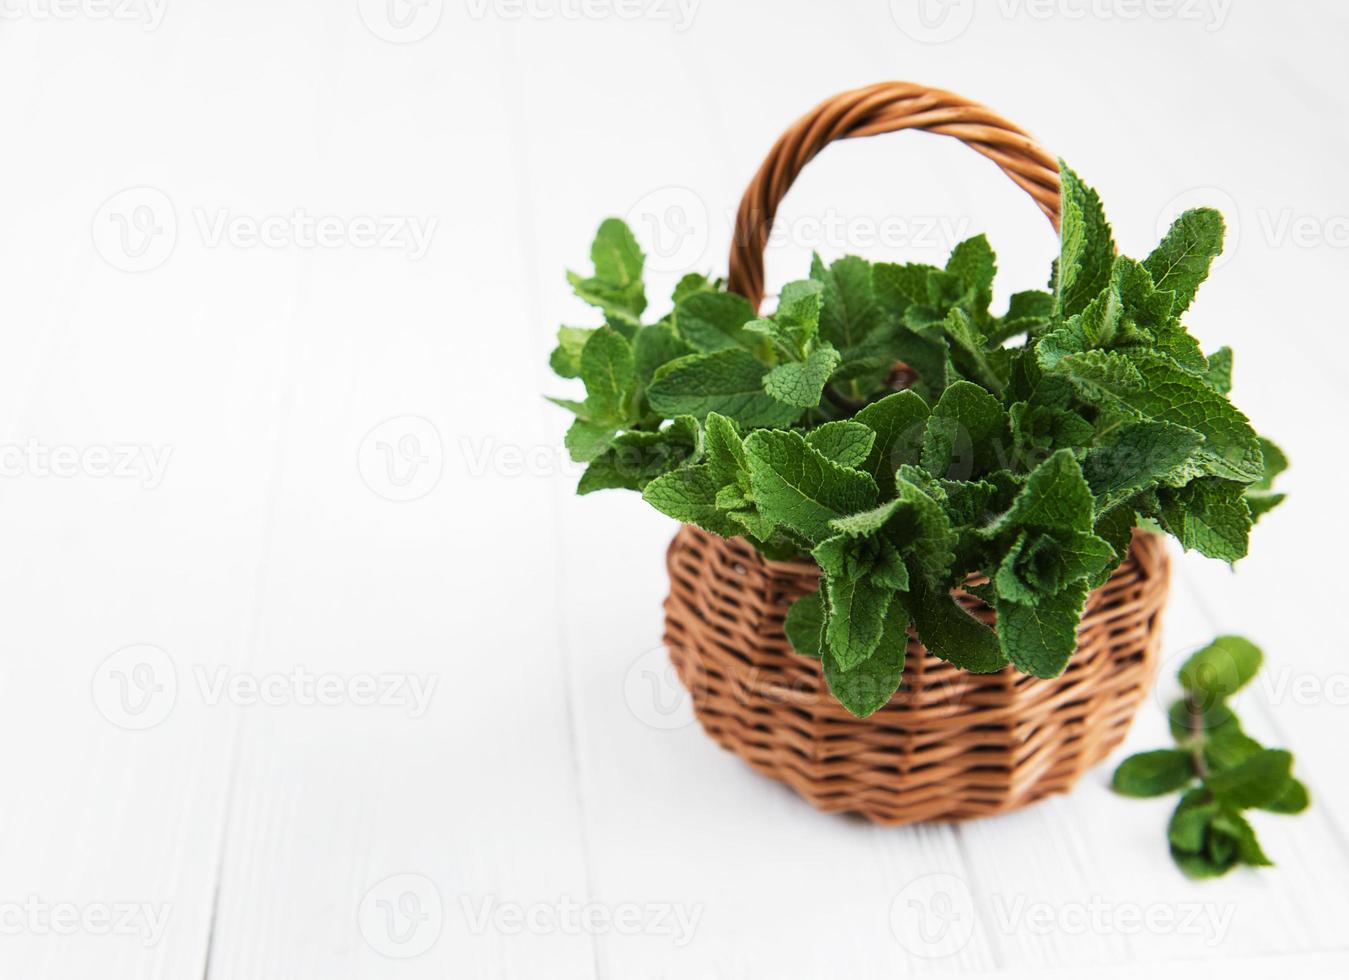 Basket with mint photo